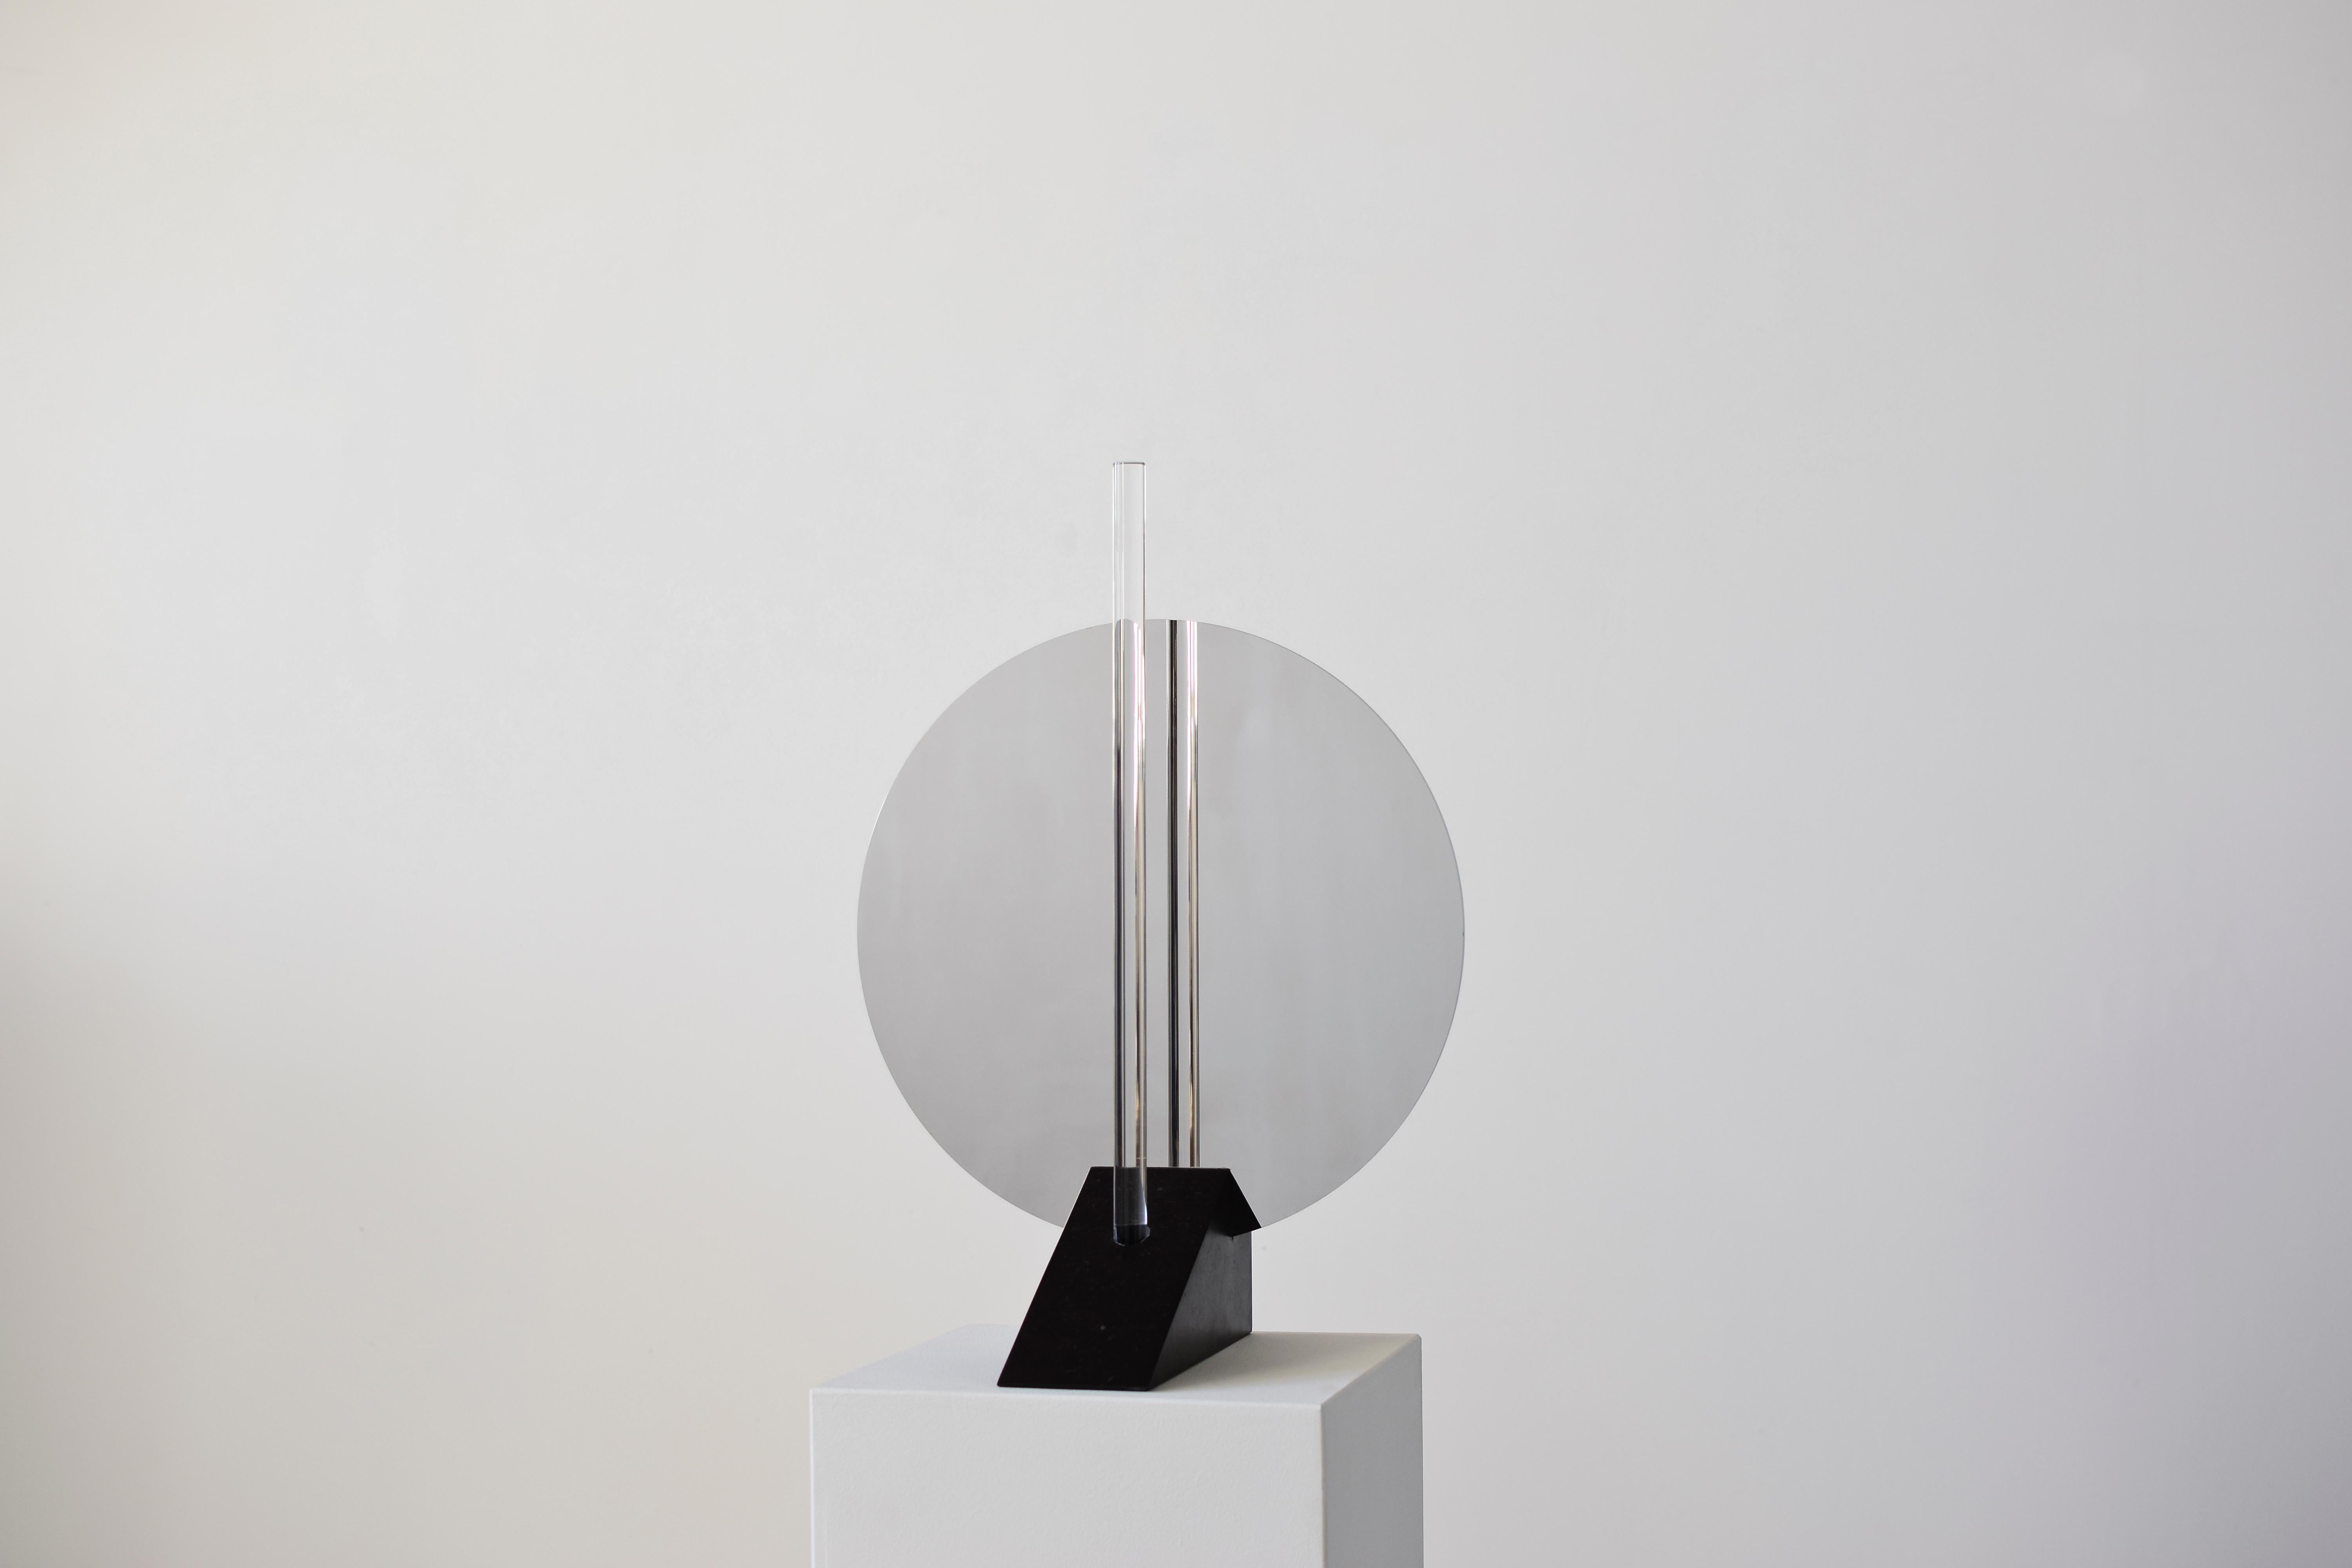 Elusive 02
A beautiful piece exploring the line between visible and invisible: half table lamp, half mirror, half sculpture.
By Maximilian Michaelis.

Belgium bluestone, polished stainless steel, arcylic glass, Led
Measures: 55 x 39 x 27 cm.